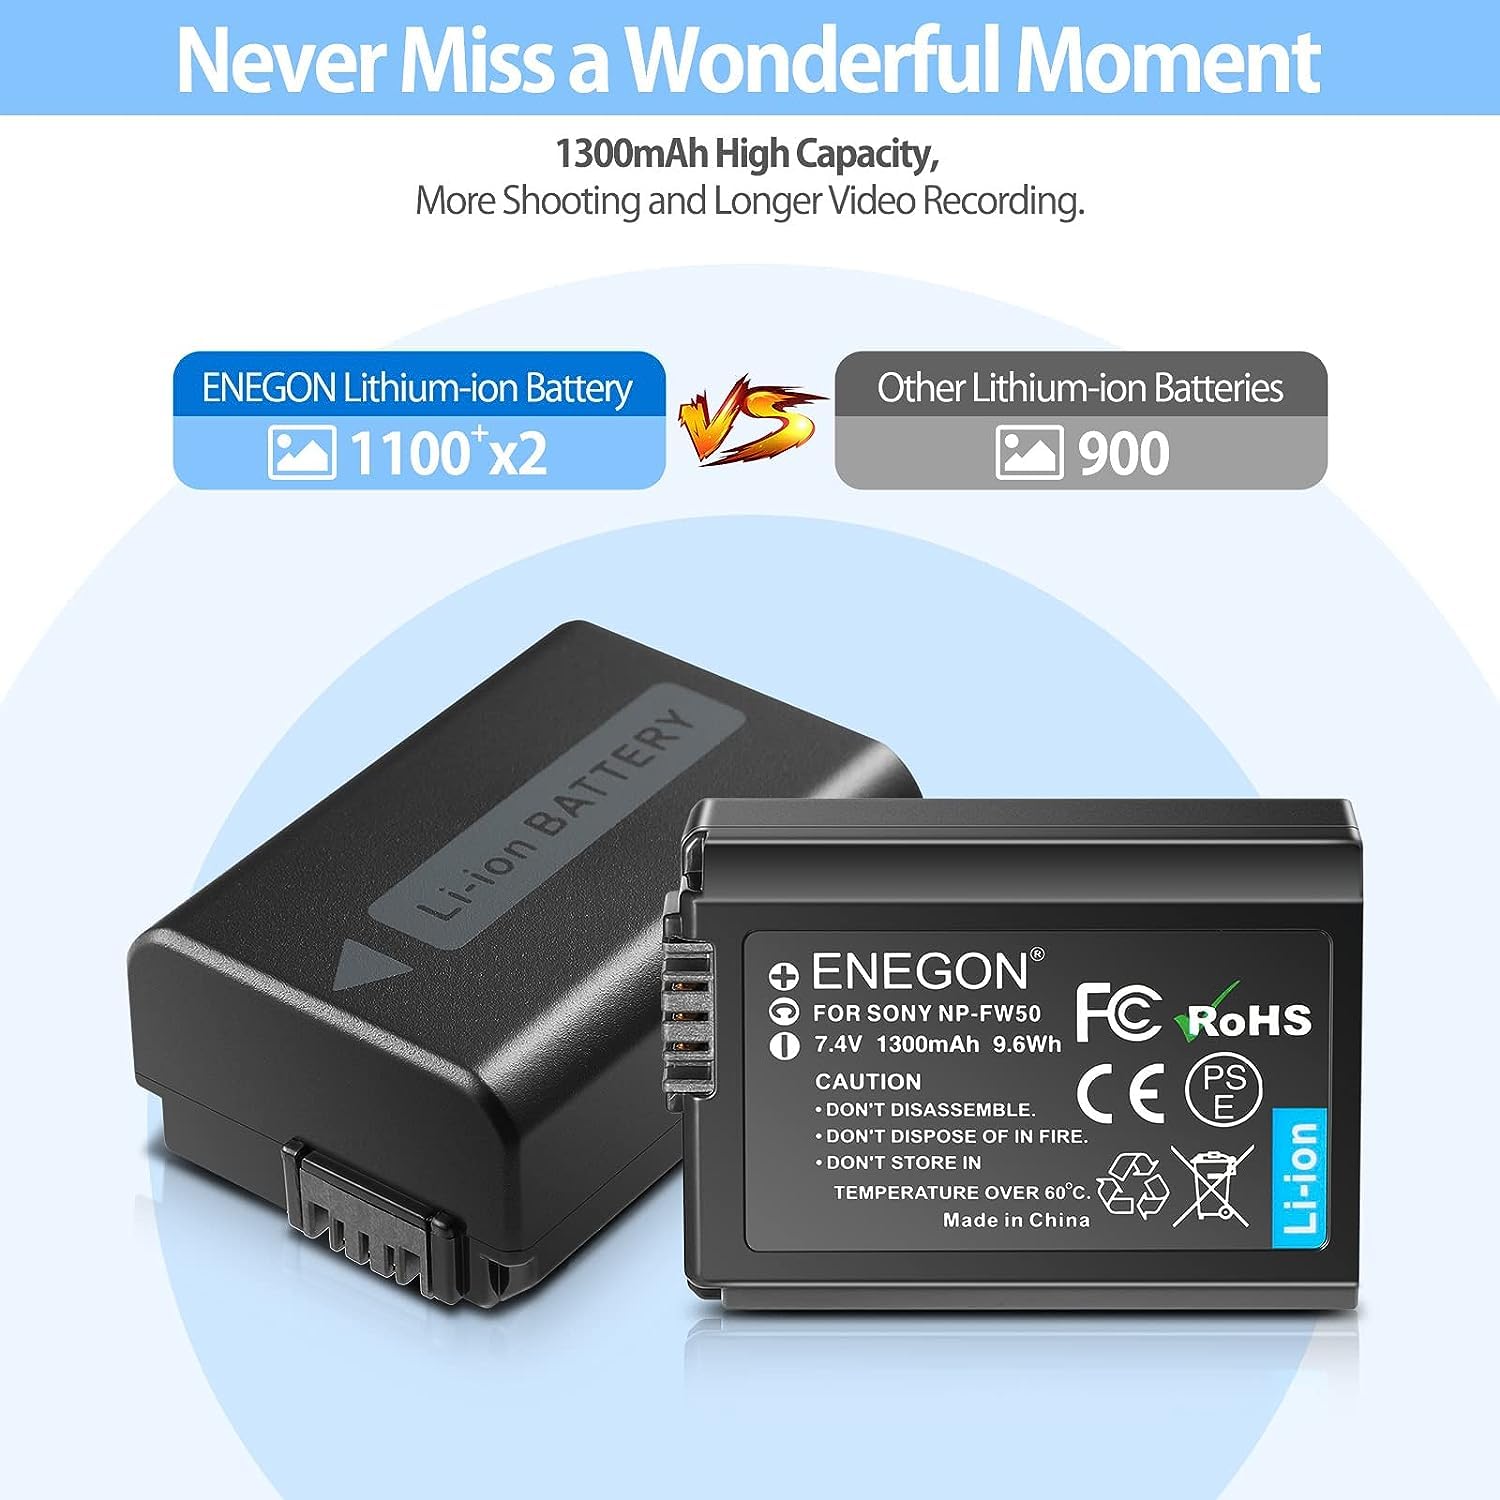 ENEGON 2x NP-FW50 Rechargeable Li-ion Battery for Sony Alpha a3000 a5000 a5100 a55 a6000 a6100 a6300 a6400 a6500, Sony a7/a7II/a7s/a7SII/a7r/a7rII rx10 rx10II, Sony NEX 3/5/7 Series, Sony SLT-A Series